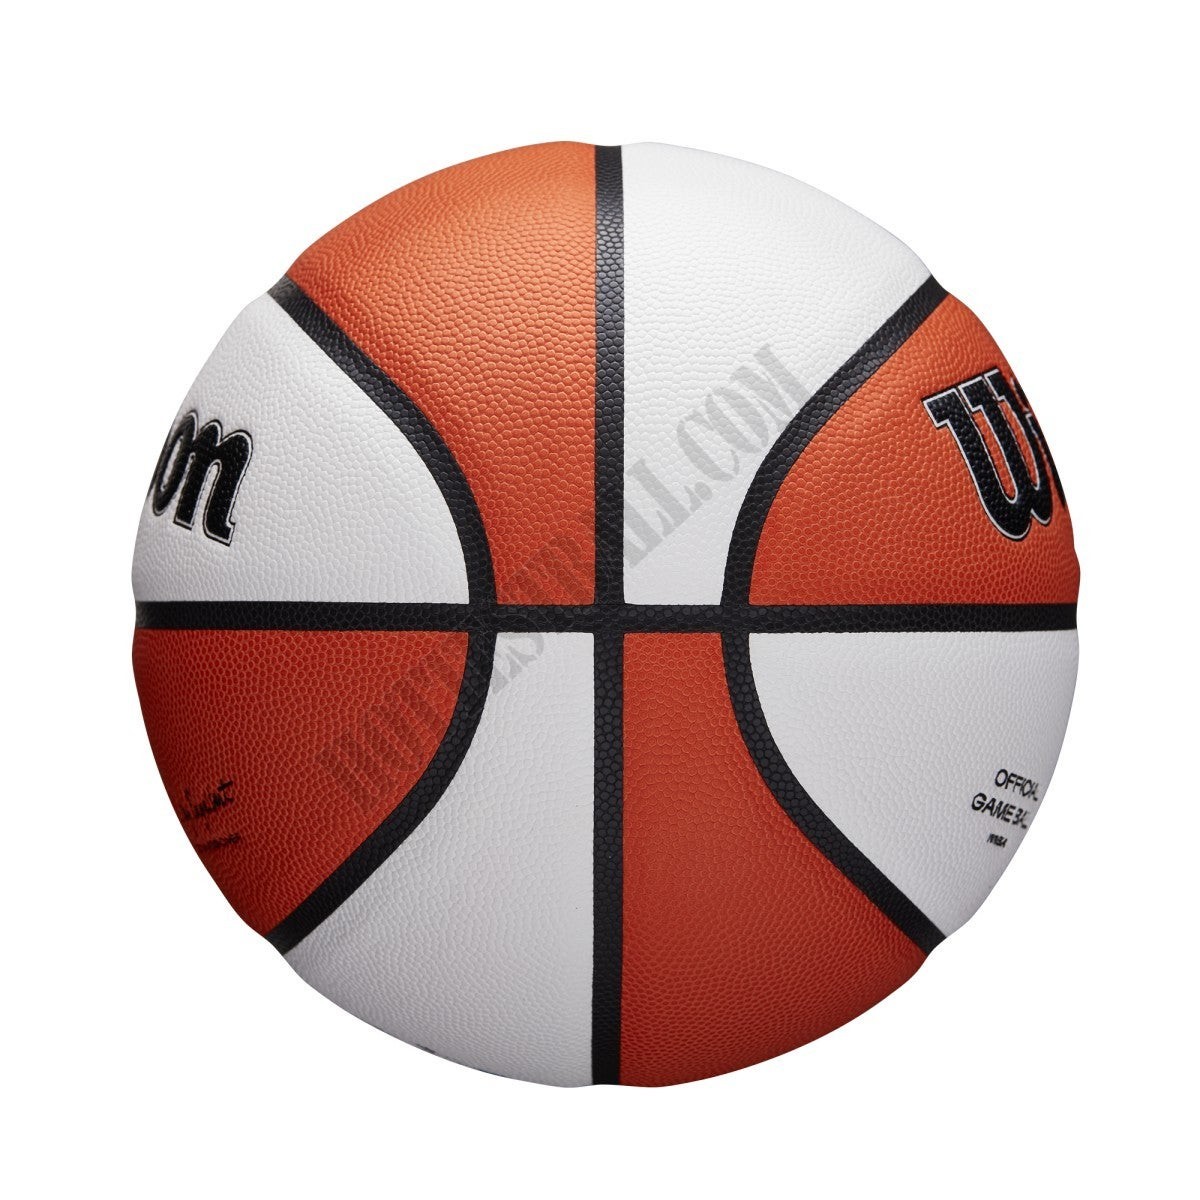 WNBA Official Game Basketball - Wilson Discount Store - -4